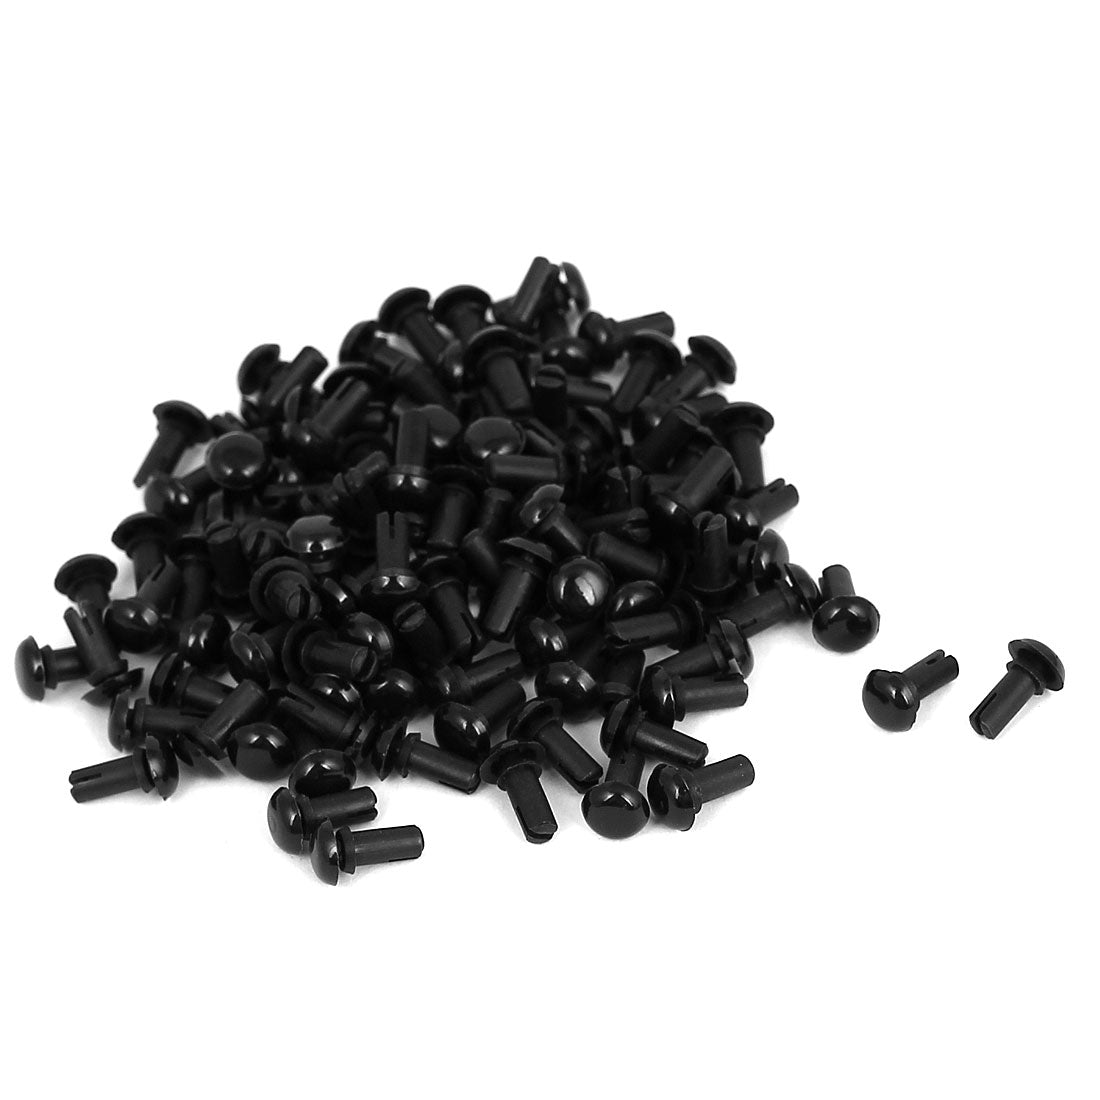 uxcell Uxcell 100Pcs Nylon Push Clips Rivet Fastener Black for 3.4-4.3mm Thickness Panel